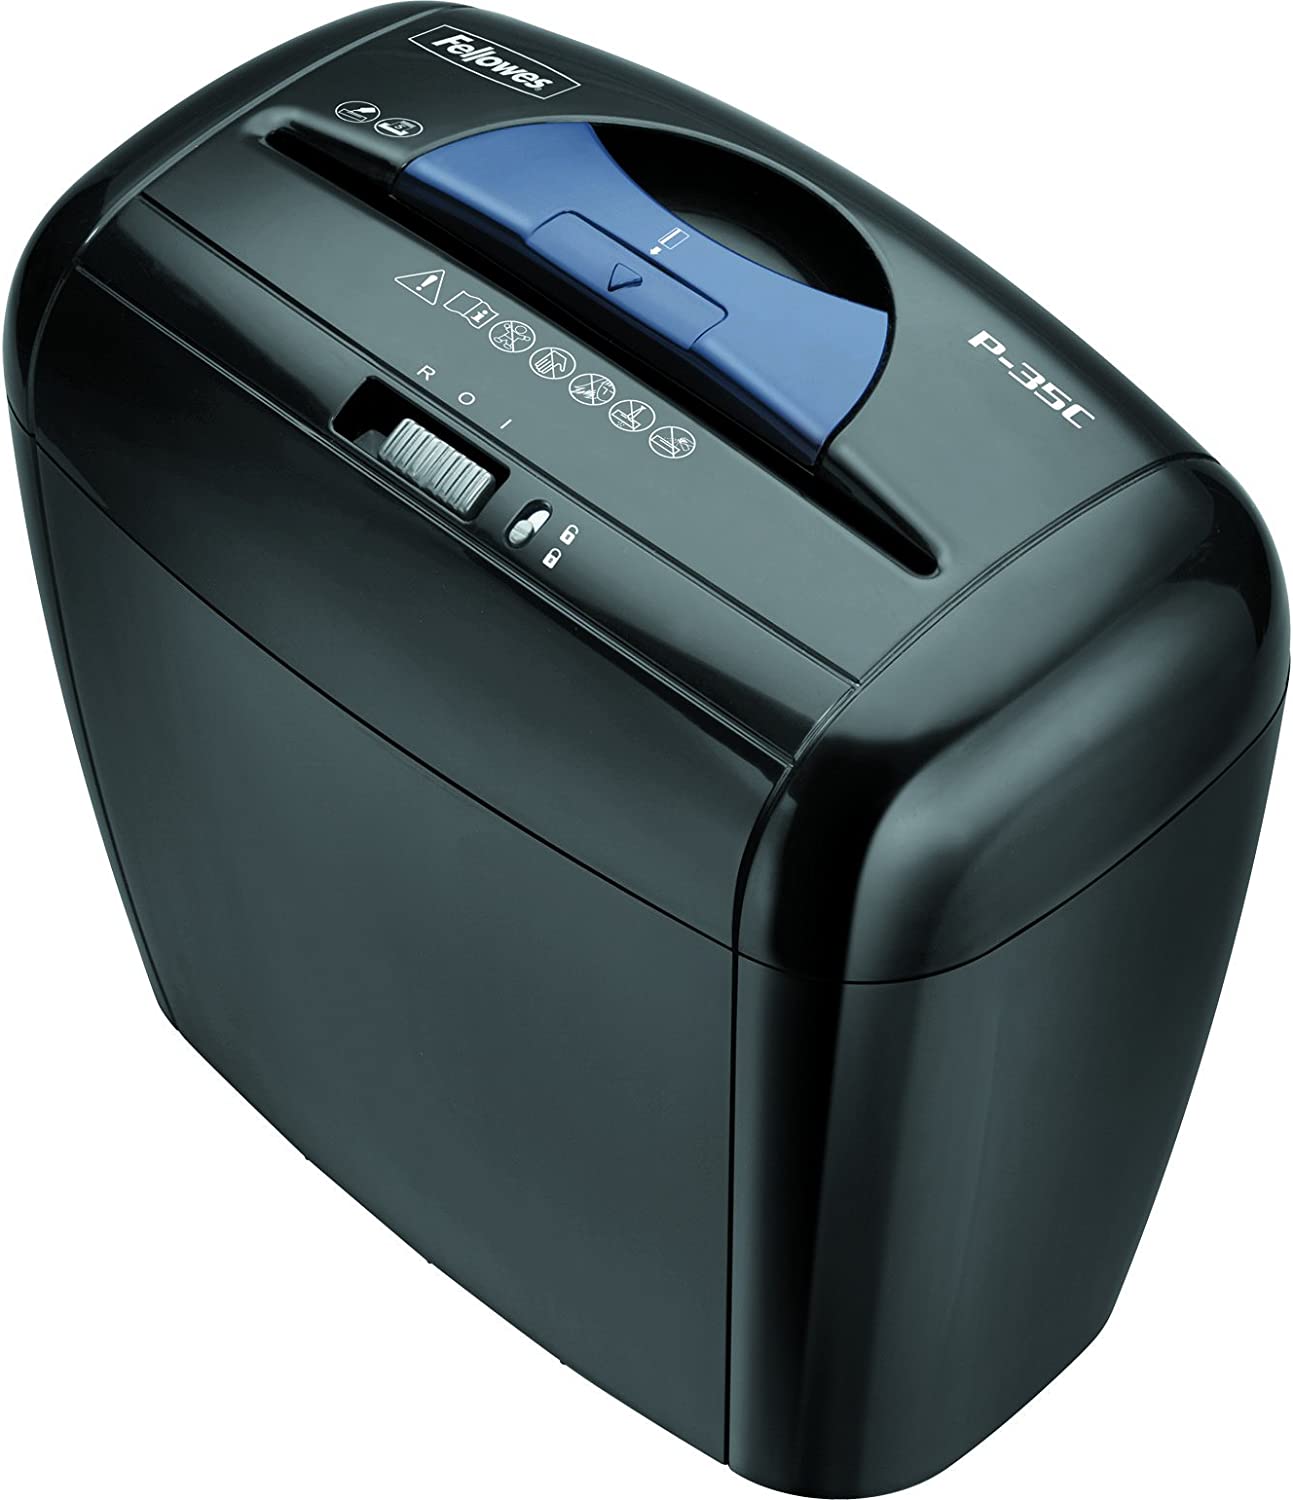 Fellowes Powershred P-35C 5-Sheet Cross-Cut Paper and Credit Card Shredder with Safety Lock